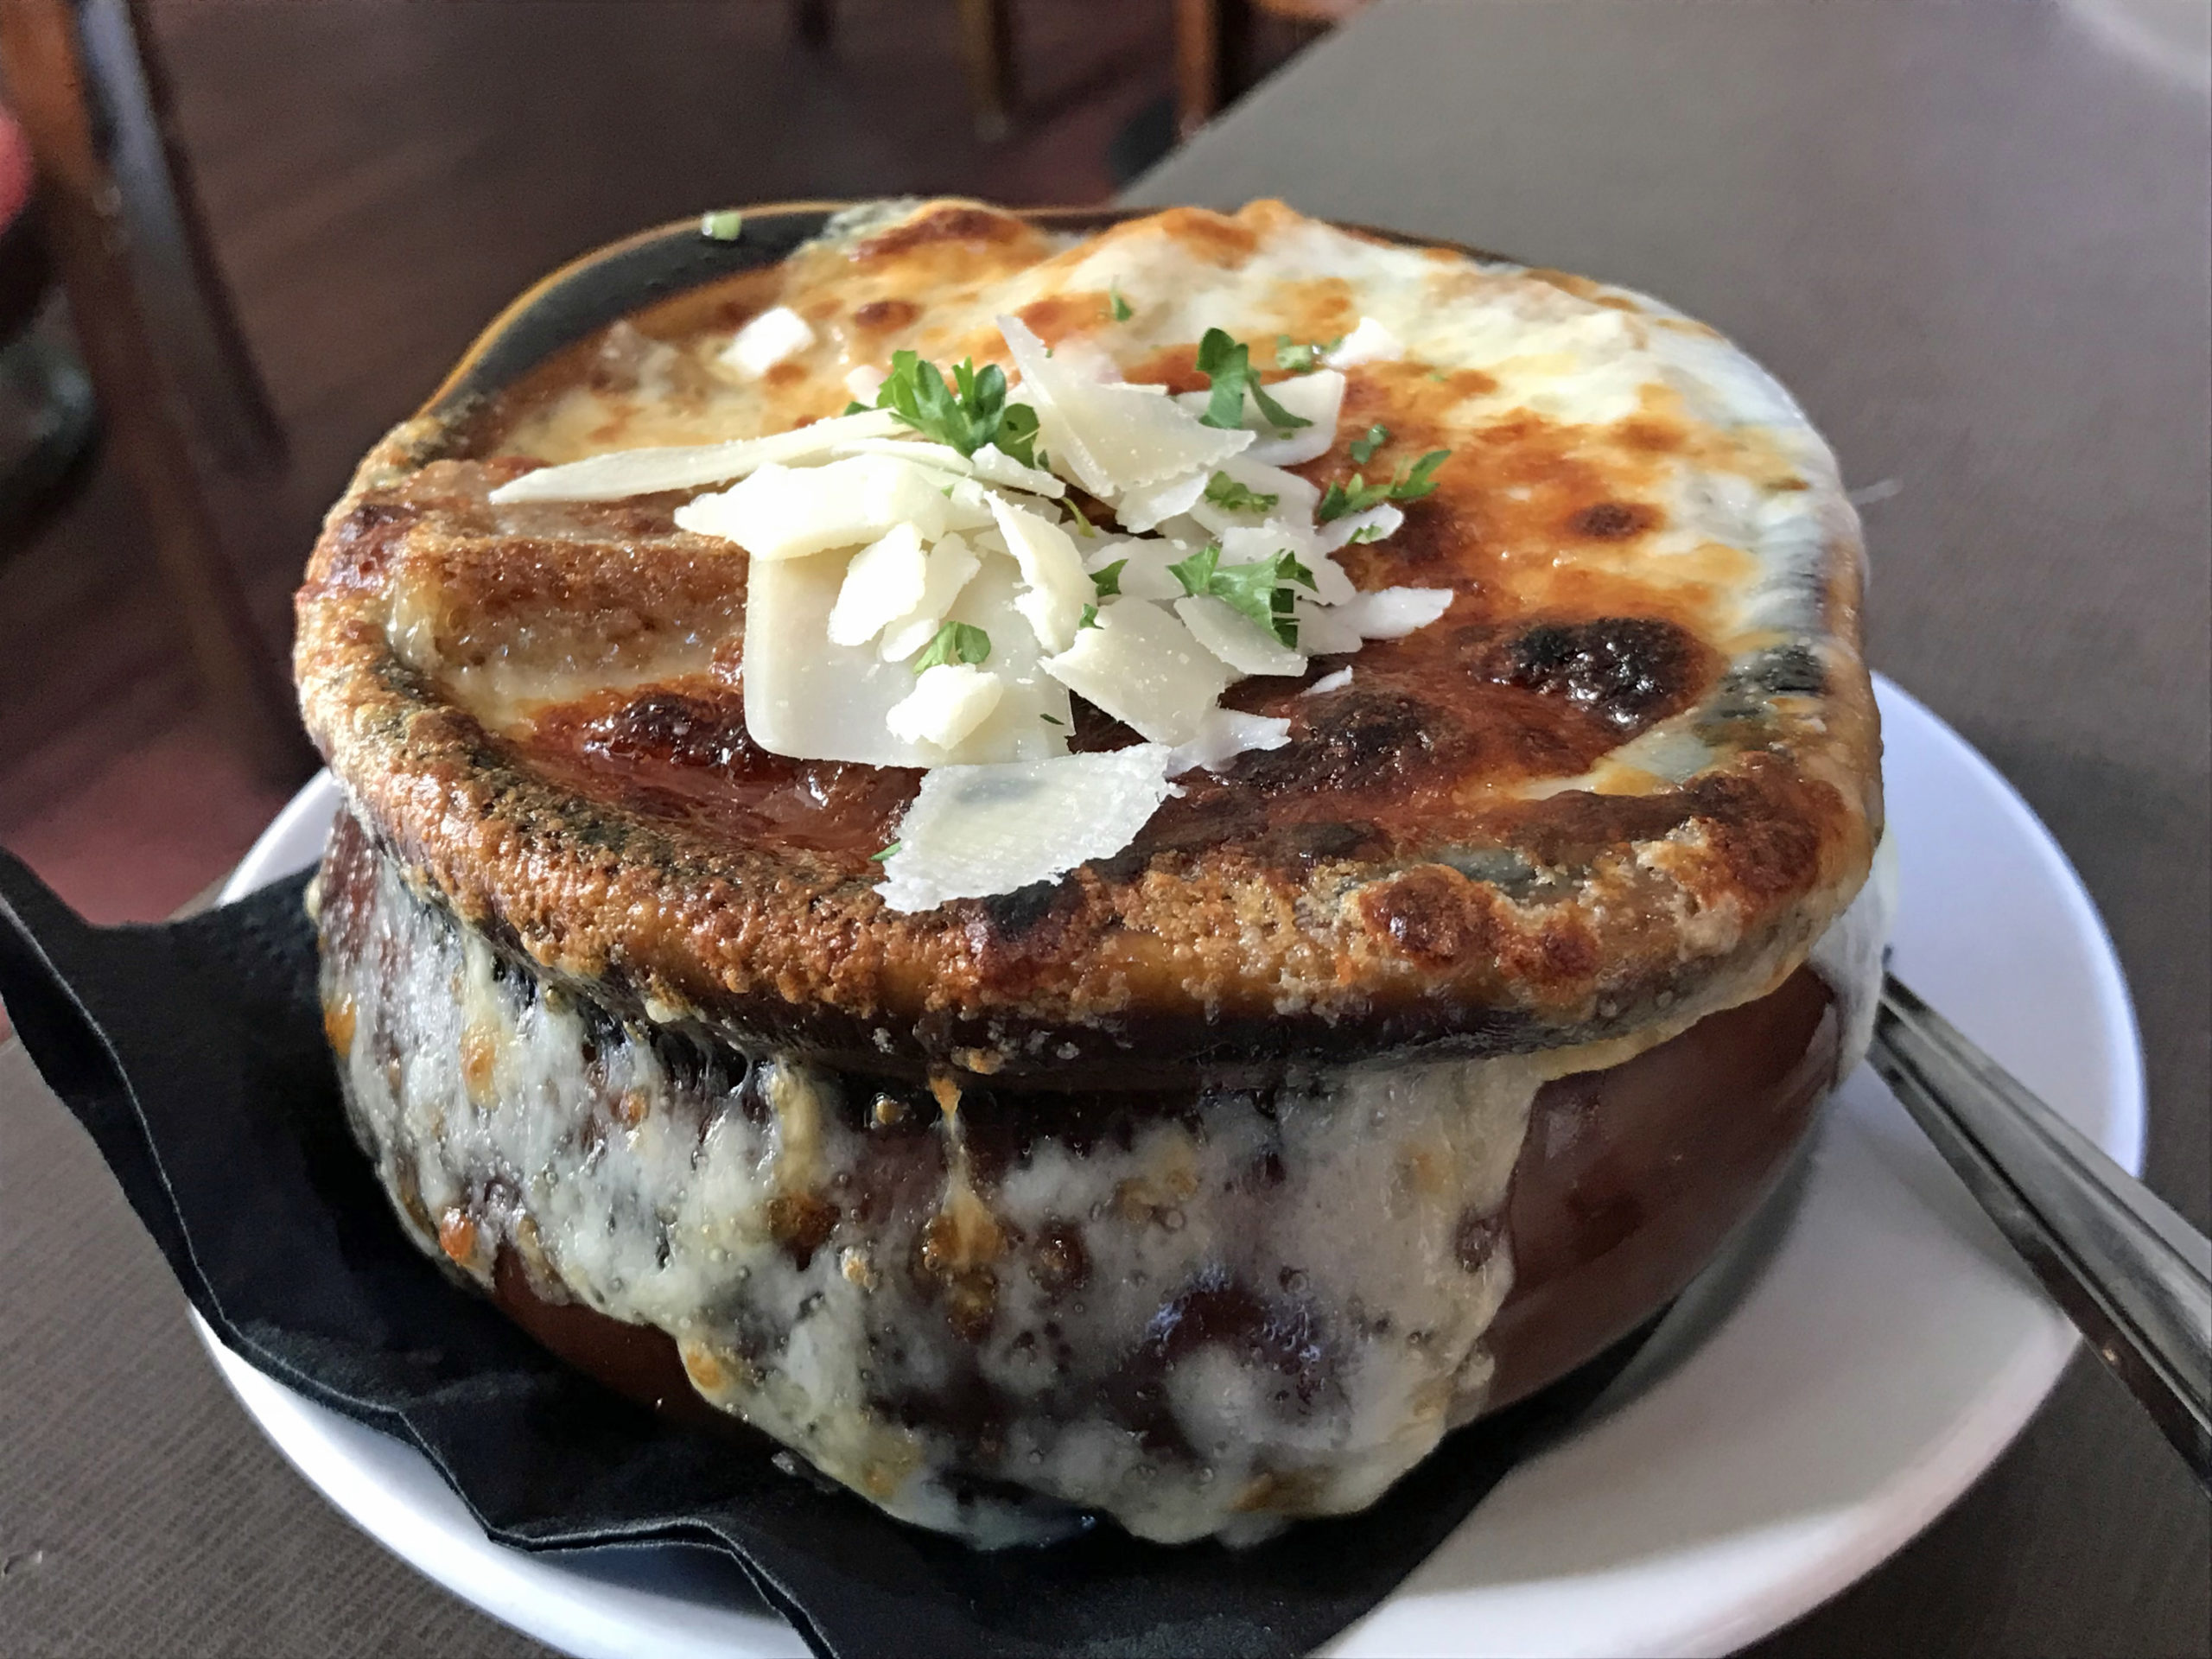 Molten cheese drips down the side of a crock of French onion soup.